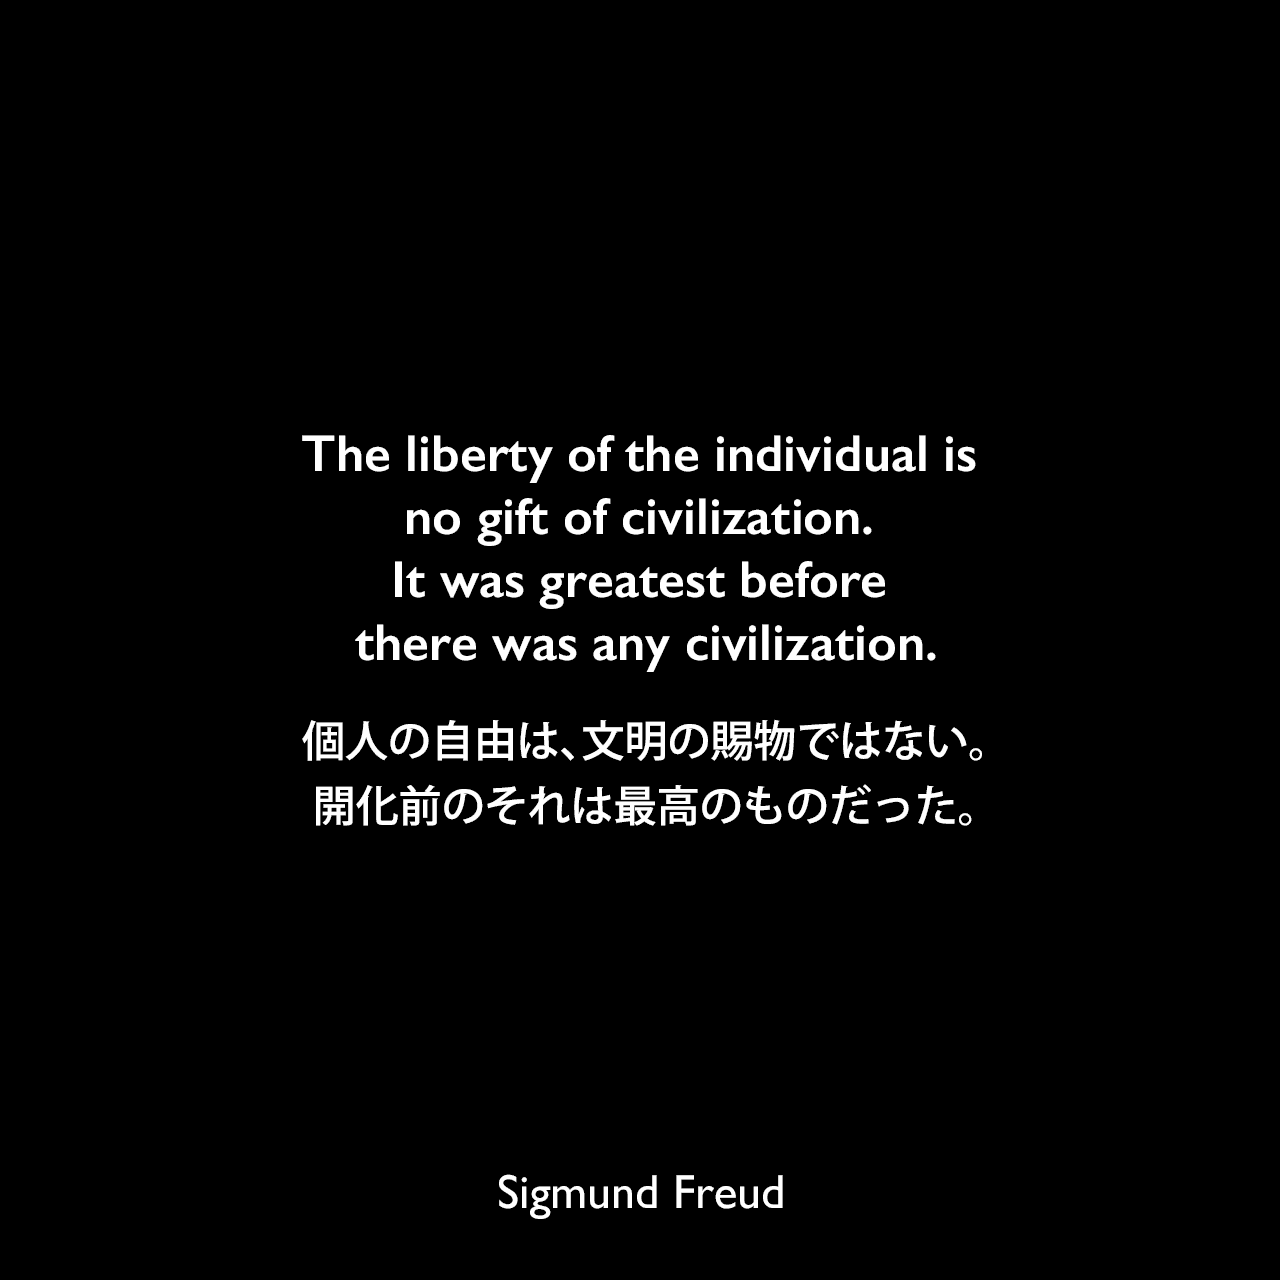 The liberty of the individual is no gift of civilization. It was greatest before there was any civilization.個人の自由は、文明の賜物ではない。開化前のそれは最高のものだった。Sigmund Freud